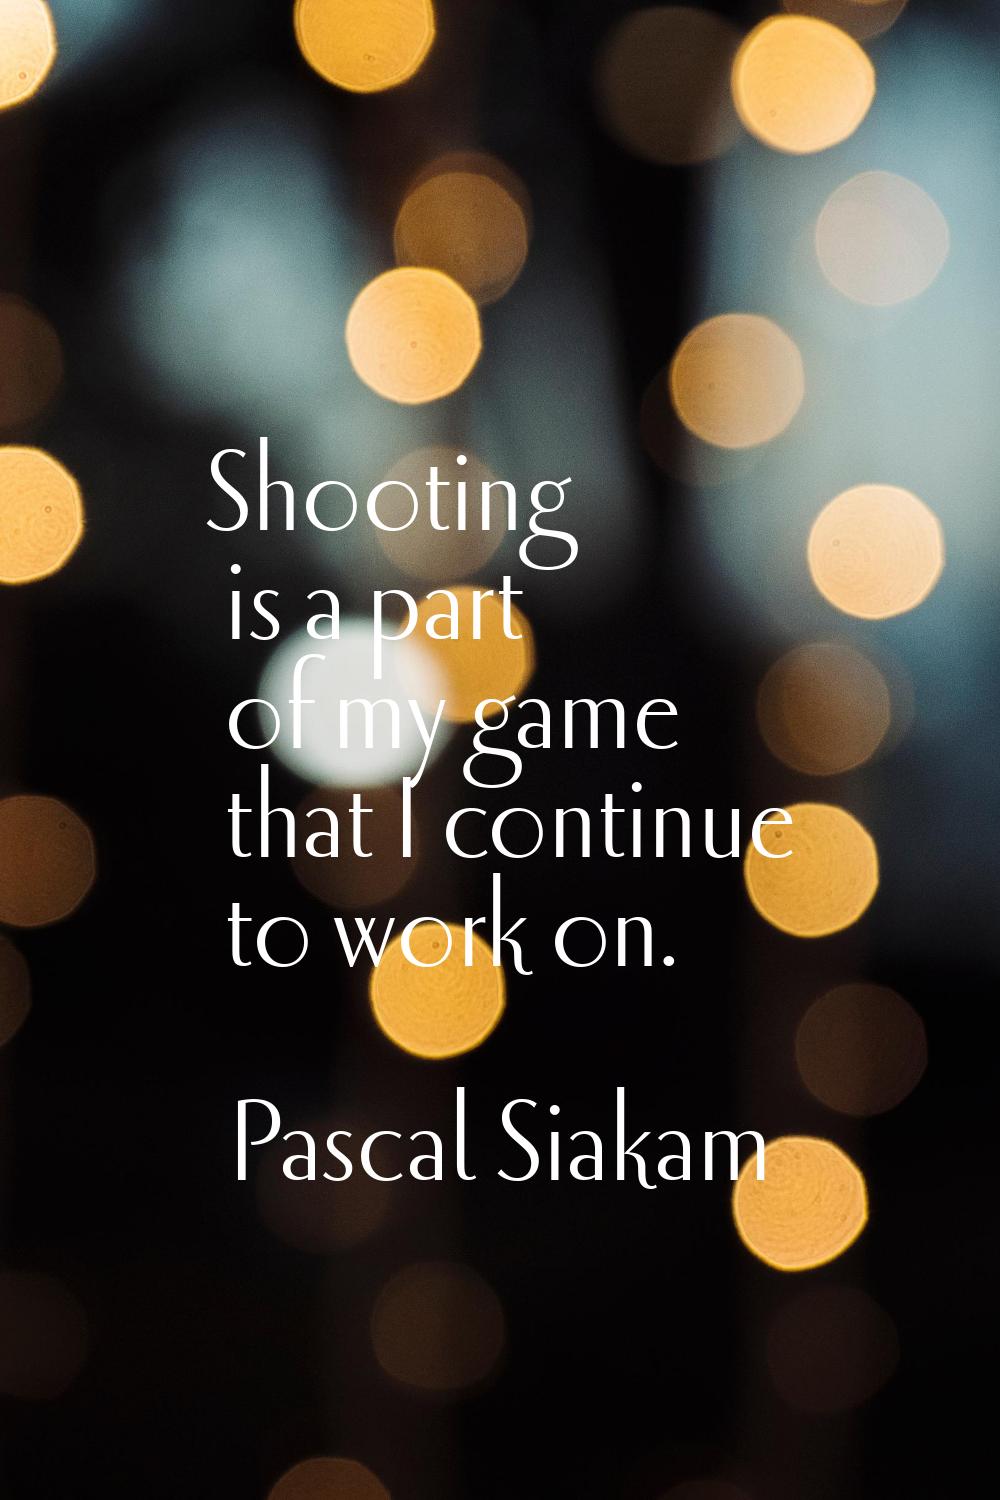 Shooting is a part of my game that I continue to work on.